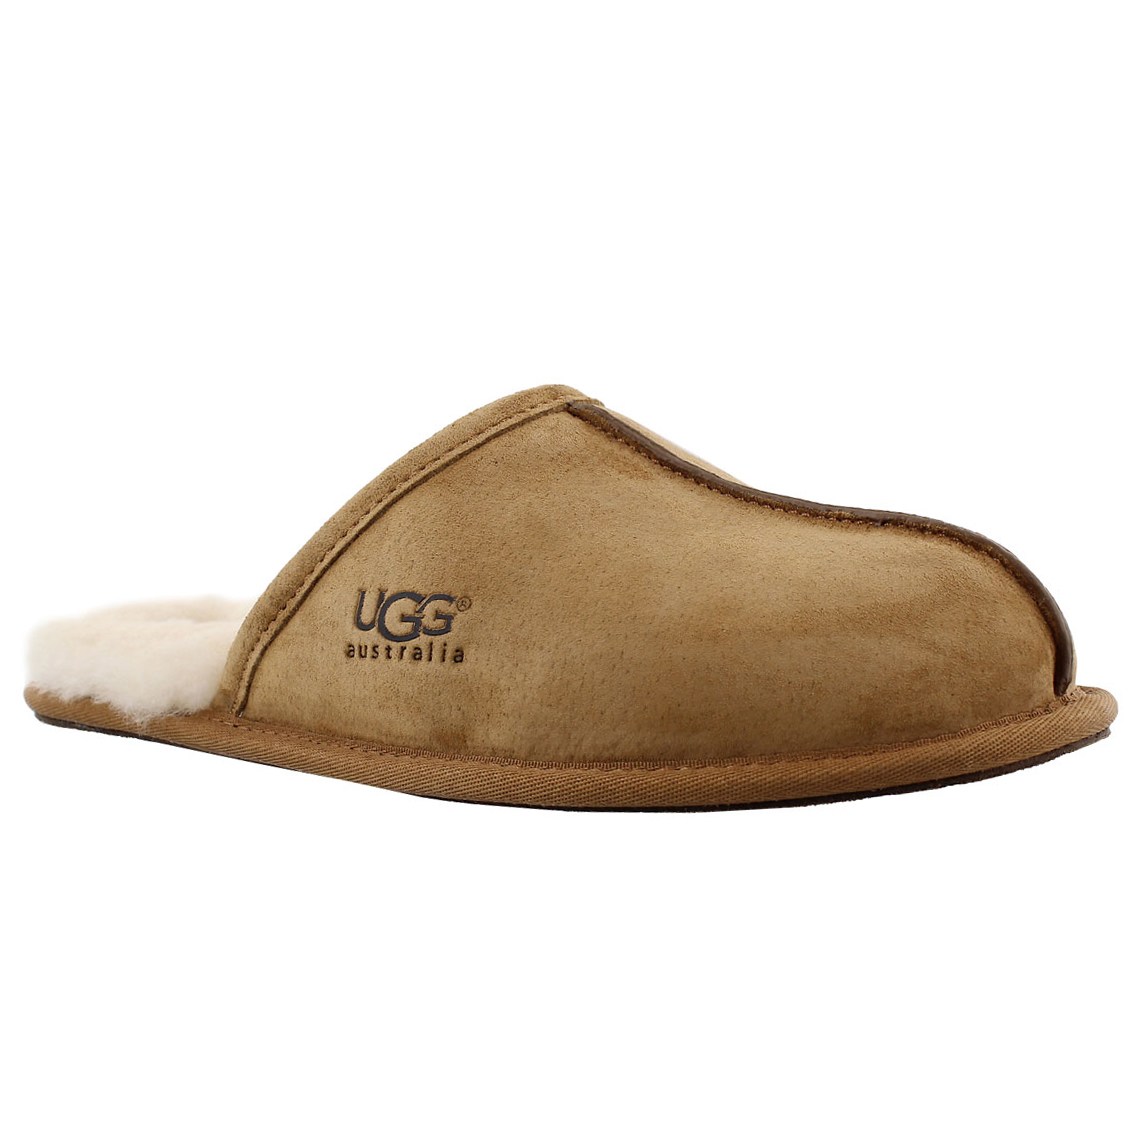 ugg scuff slippers, men's slippers, Men's house slippers THE ULTIMATE GIFT GUIDE, GIFT GUIDE FOR WOMEN, GIFT GUIDE FOR MEN, GIFT GUIDE FOR KIDS, GIFT GUIDE FOR TEENS, CHRISTMAS WISHLIST, CHRISTMAS GIFT GUIDE, ULTIMATE GIFT GUIDE, GIFT GUIDE FOR EVERYONE ON YOUR LIST, HOLIDAY GIFT GUIDE 